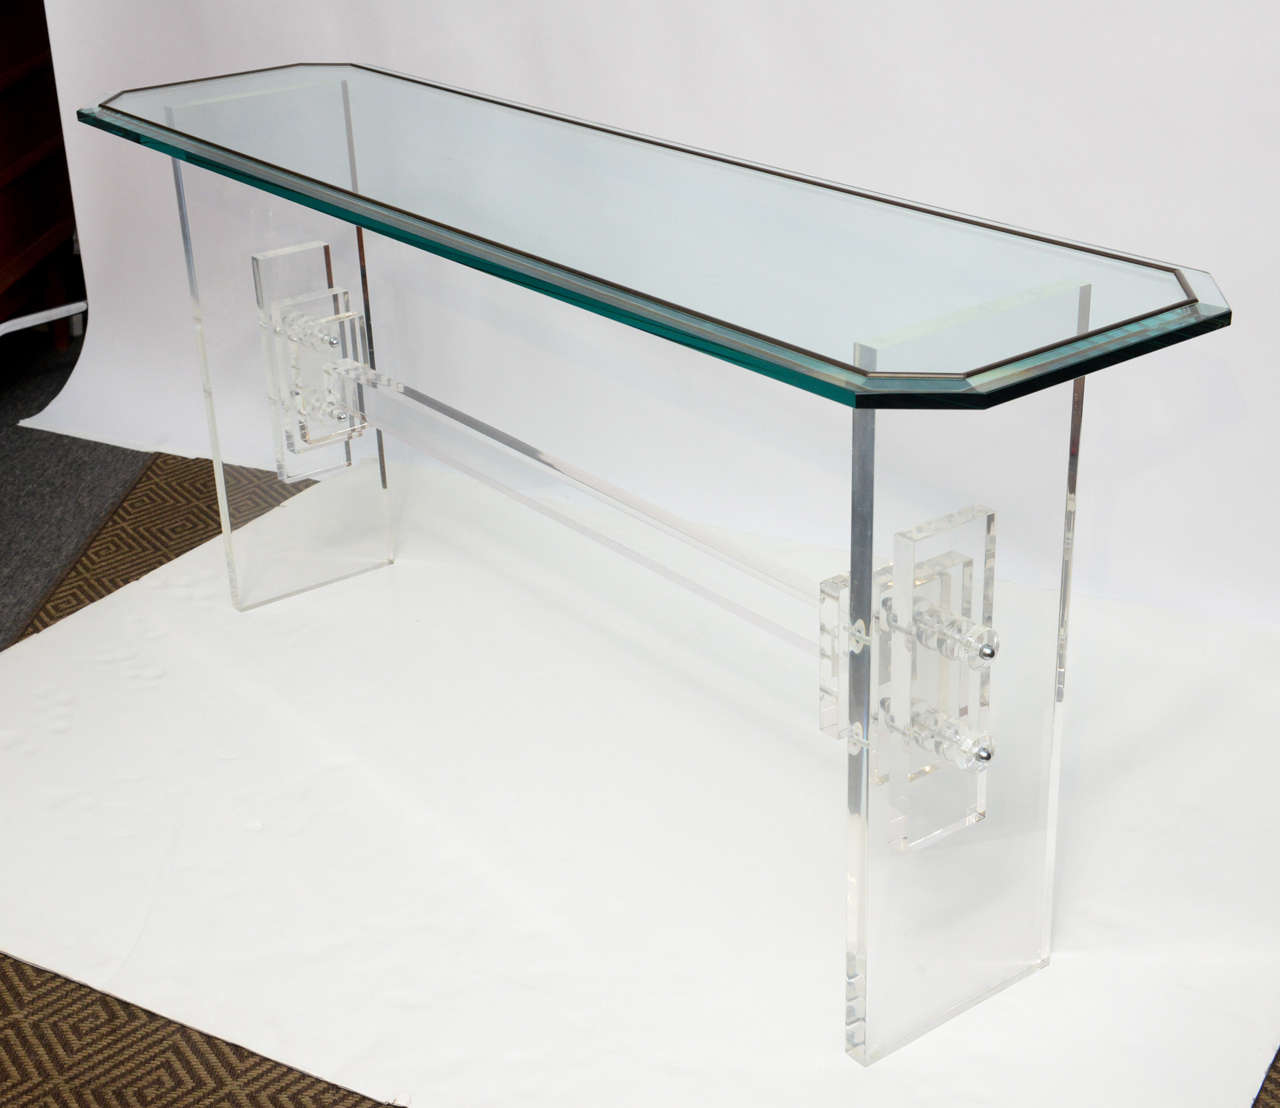 Simple and strong, this lovely acrylic table can light up any entrance. The table legs are graced with Art Deco inspired stacks of acrylic. The whole table is topped with a thick slab of glass cut in a long octagon with brass inlay. Tempered glass